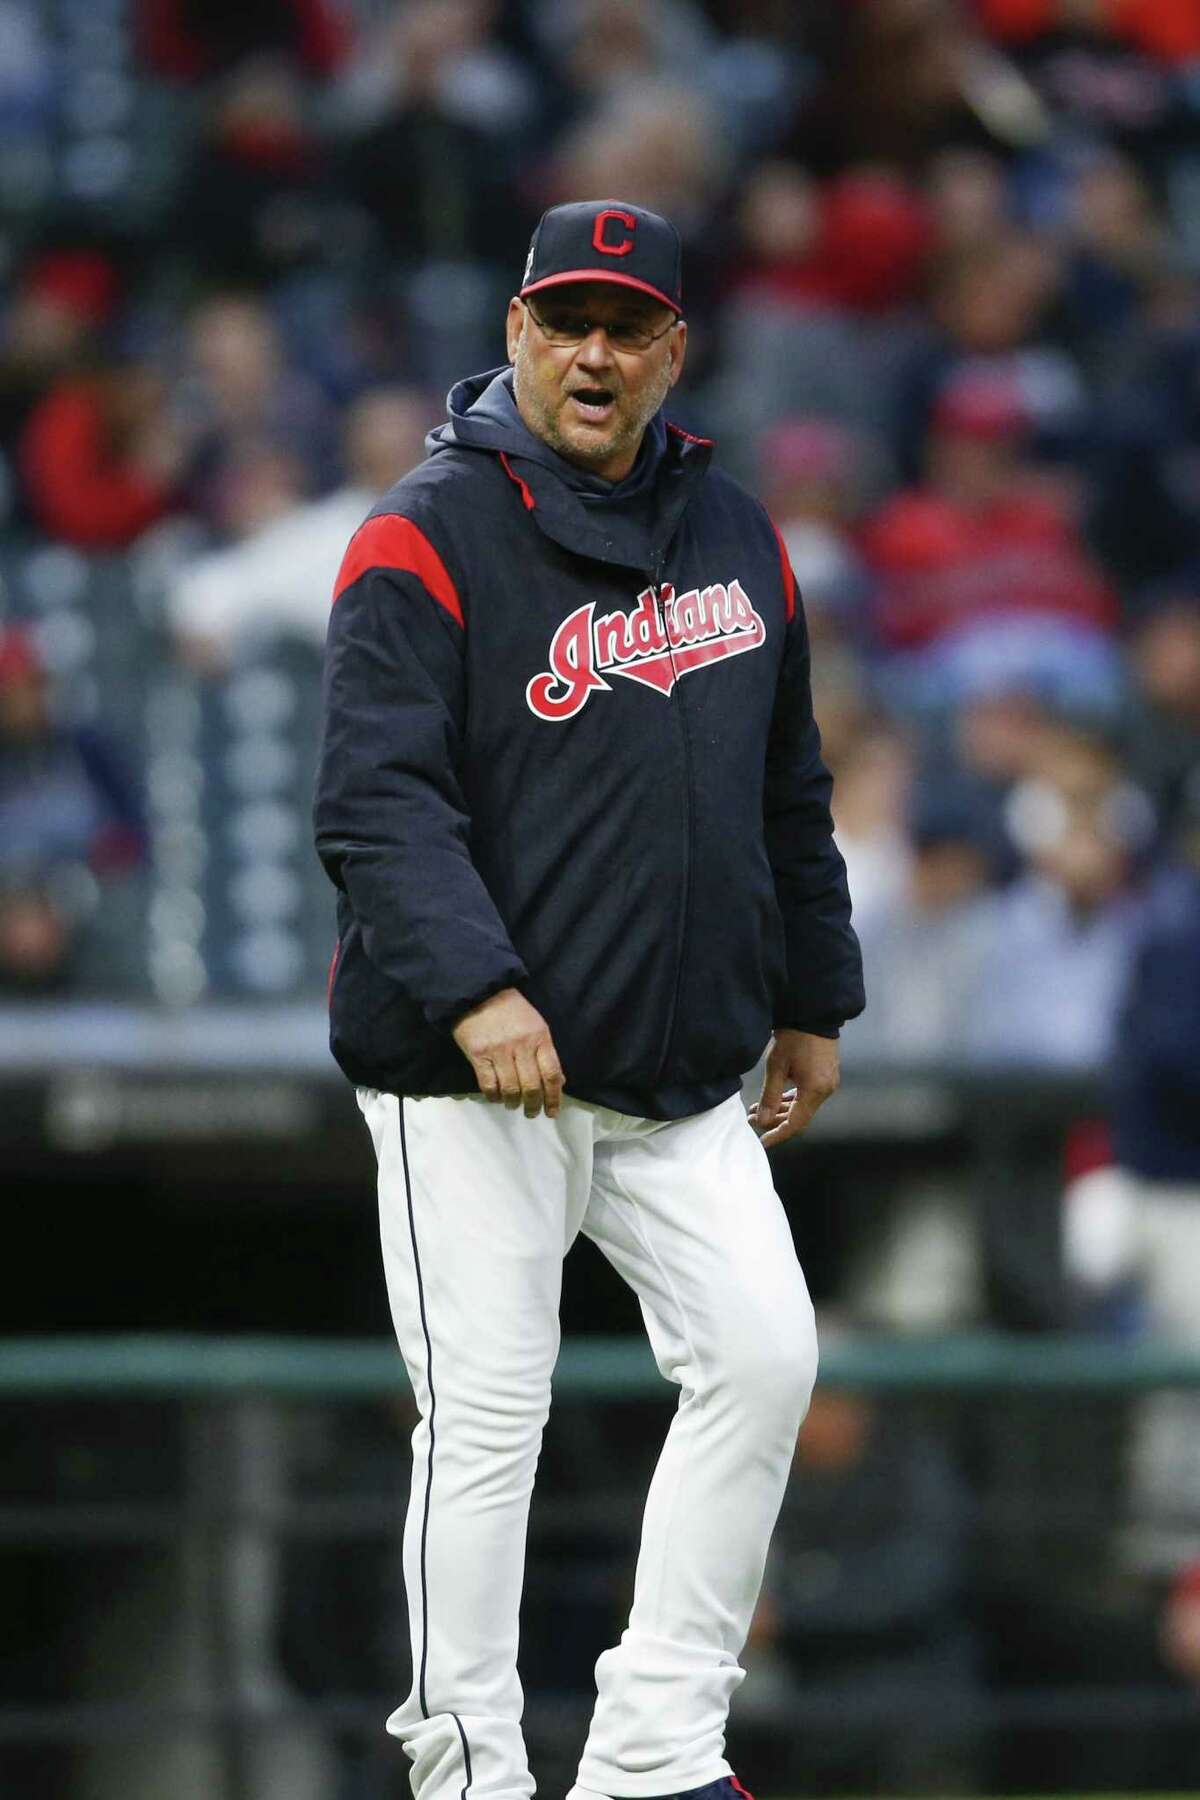 Cleveland's baseball team to drop 'Indians' from team name